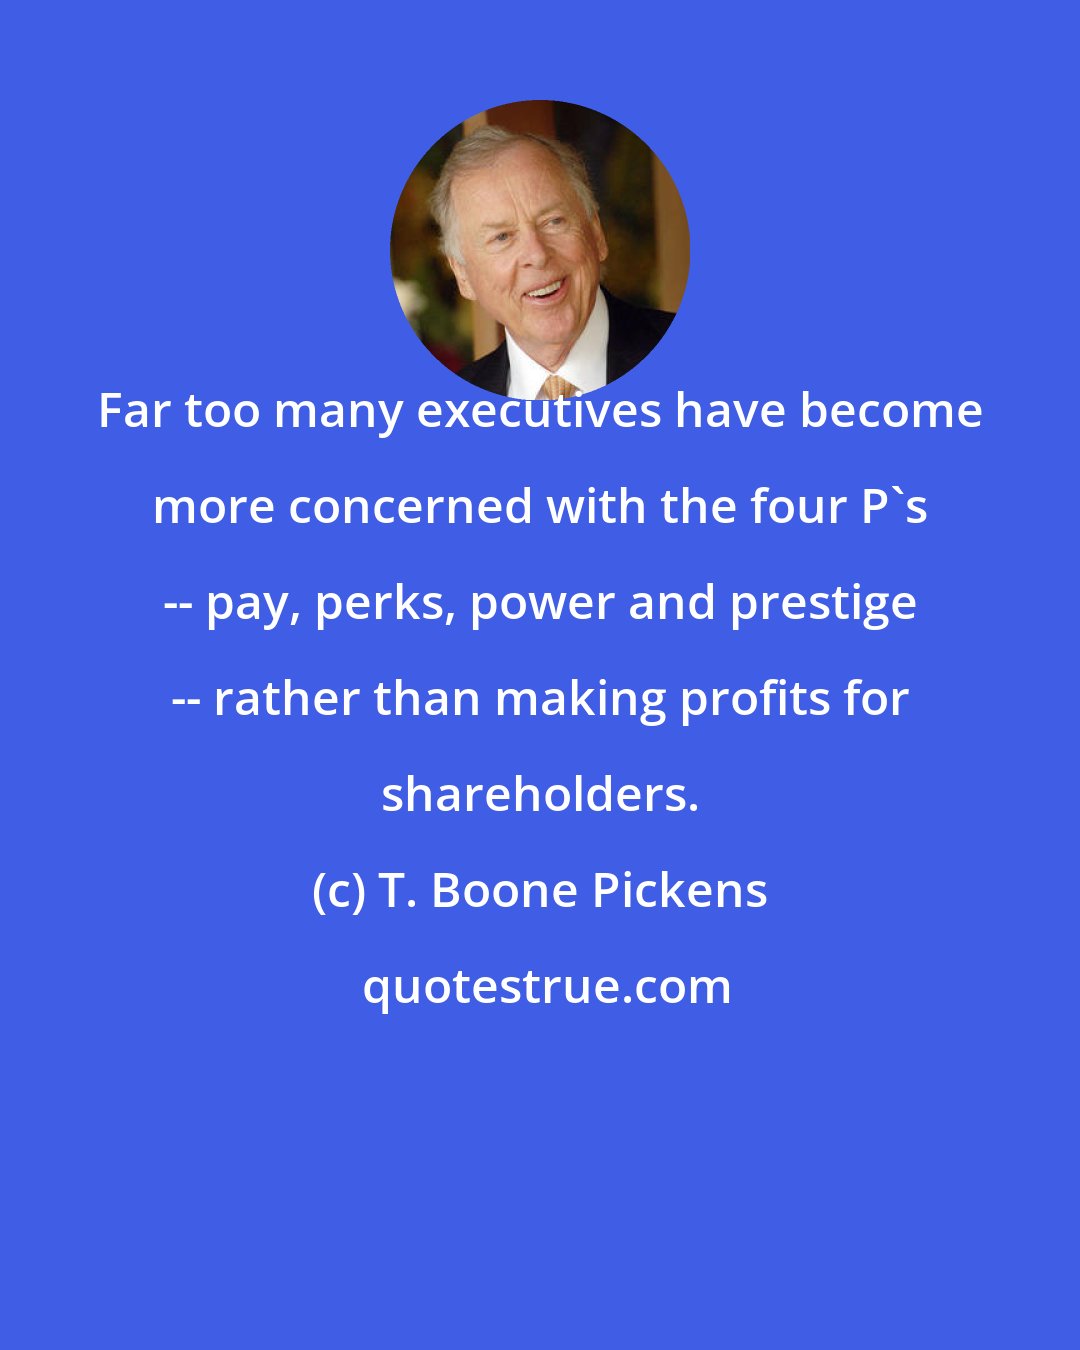 T. Boone Pickens: Far too many executives have become more concerned with the four P's -- pay, perks, power and prestige -- rather than making profits for shareholders.